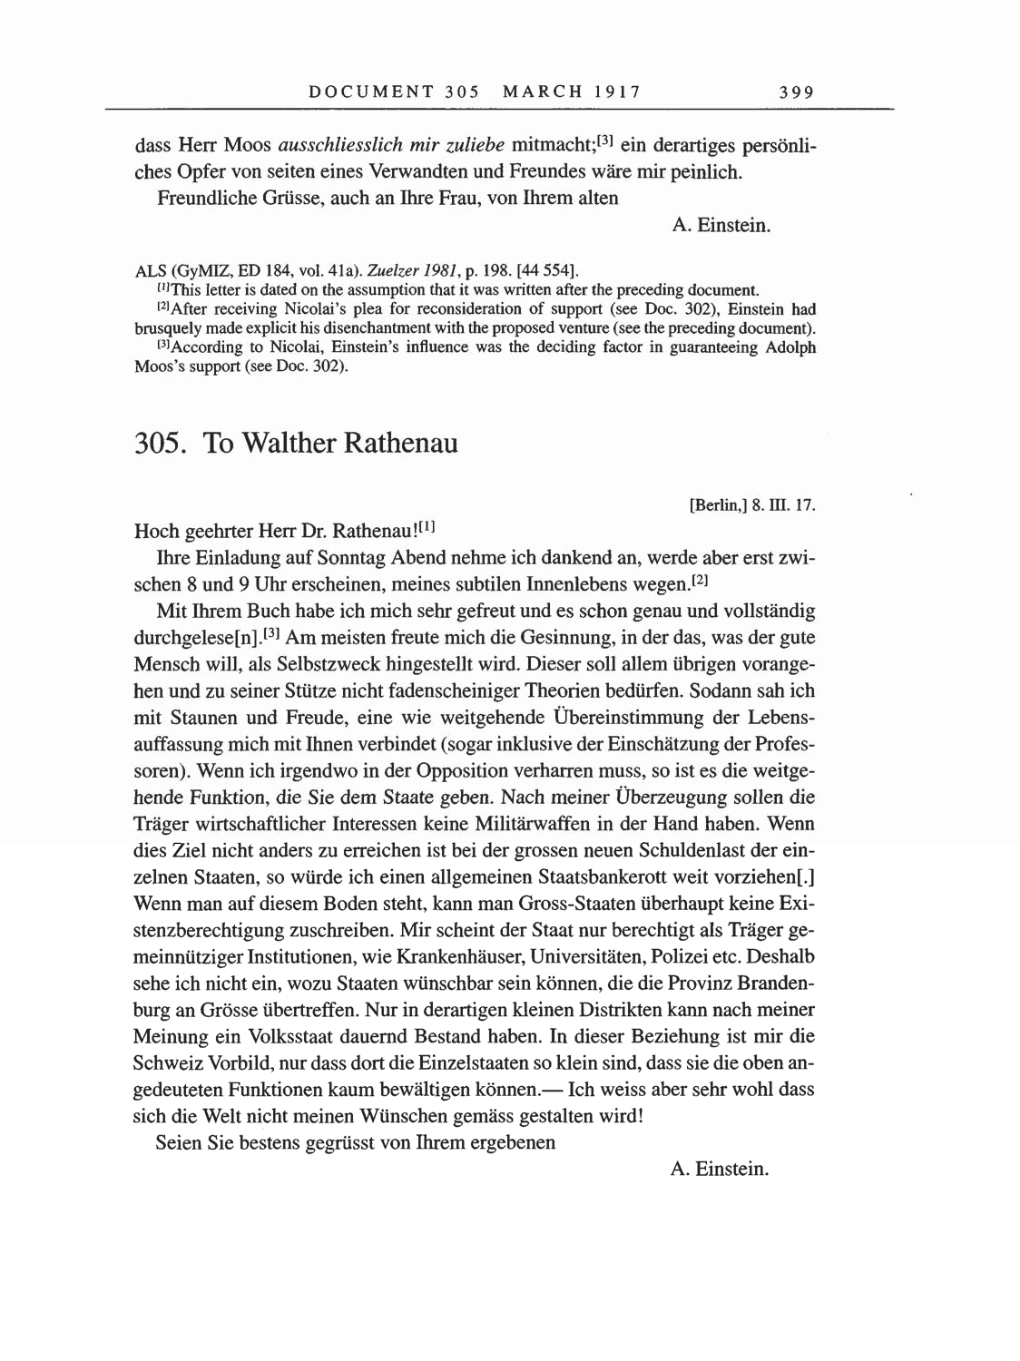 Volume 8, Part A: The Berlin Years: Correspondence 1914-1917 page 399